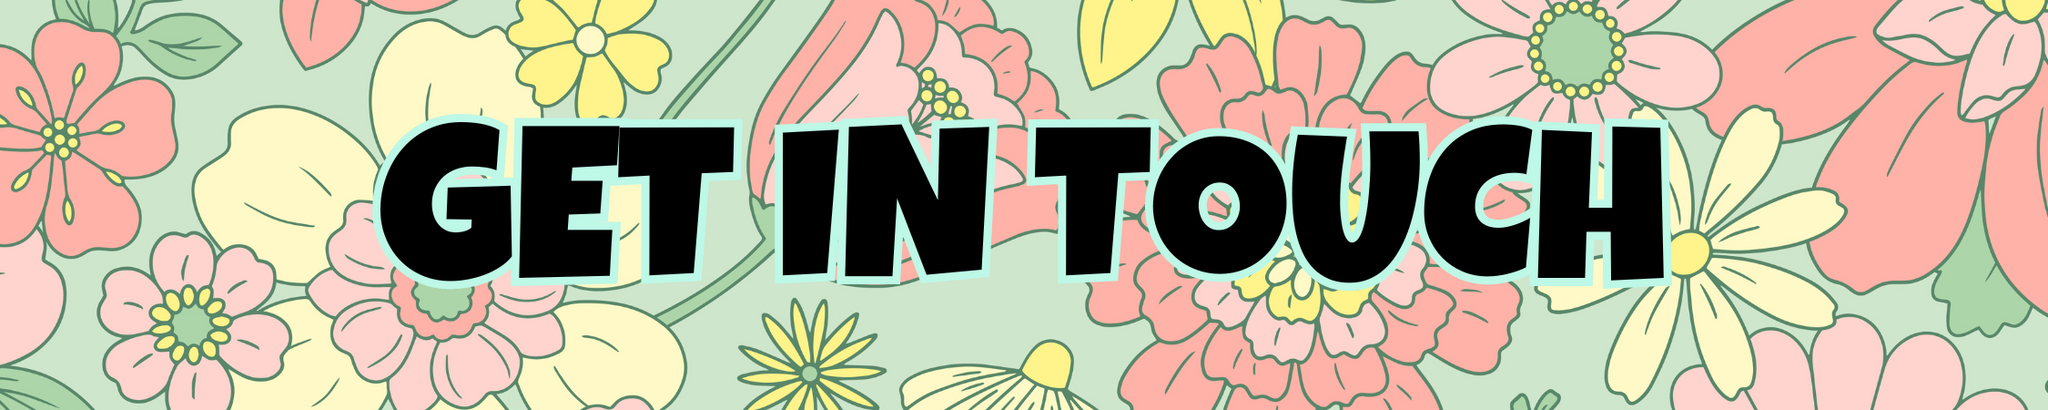 The words "Get In Touch" in black font on a colorful floral background